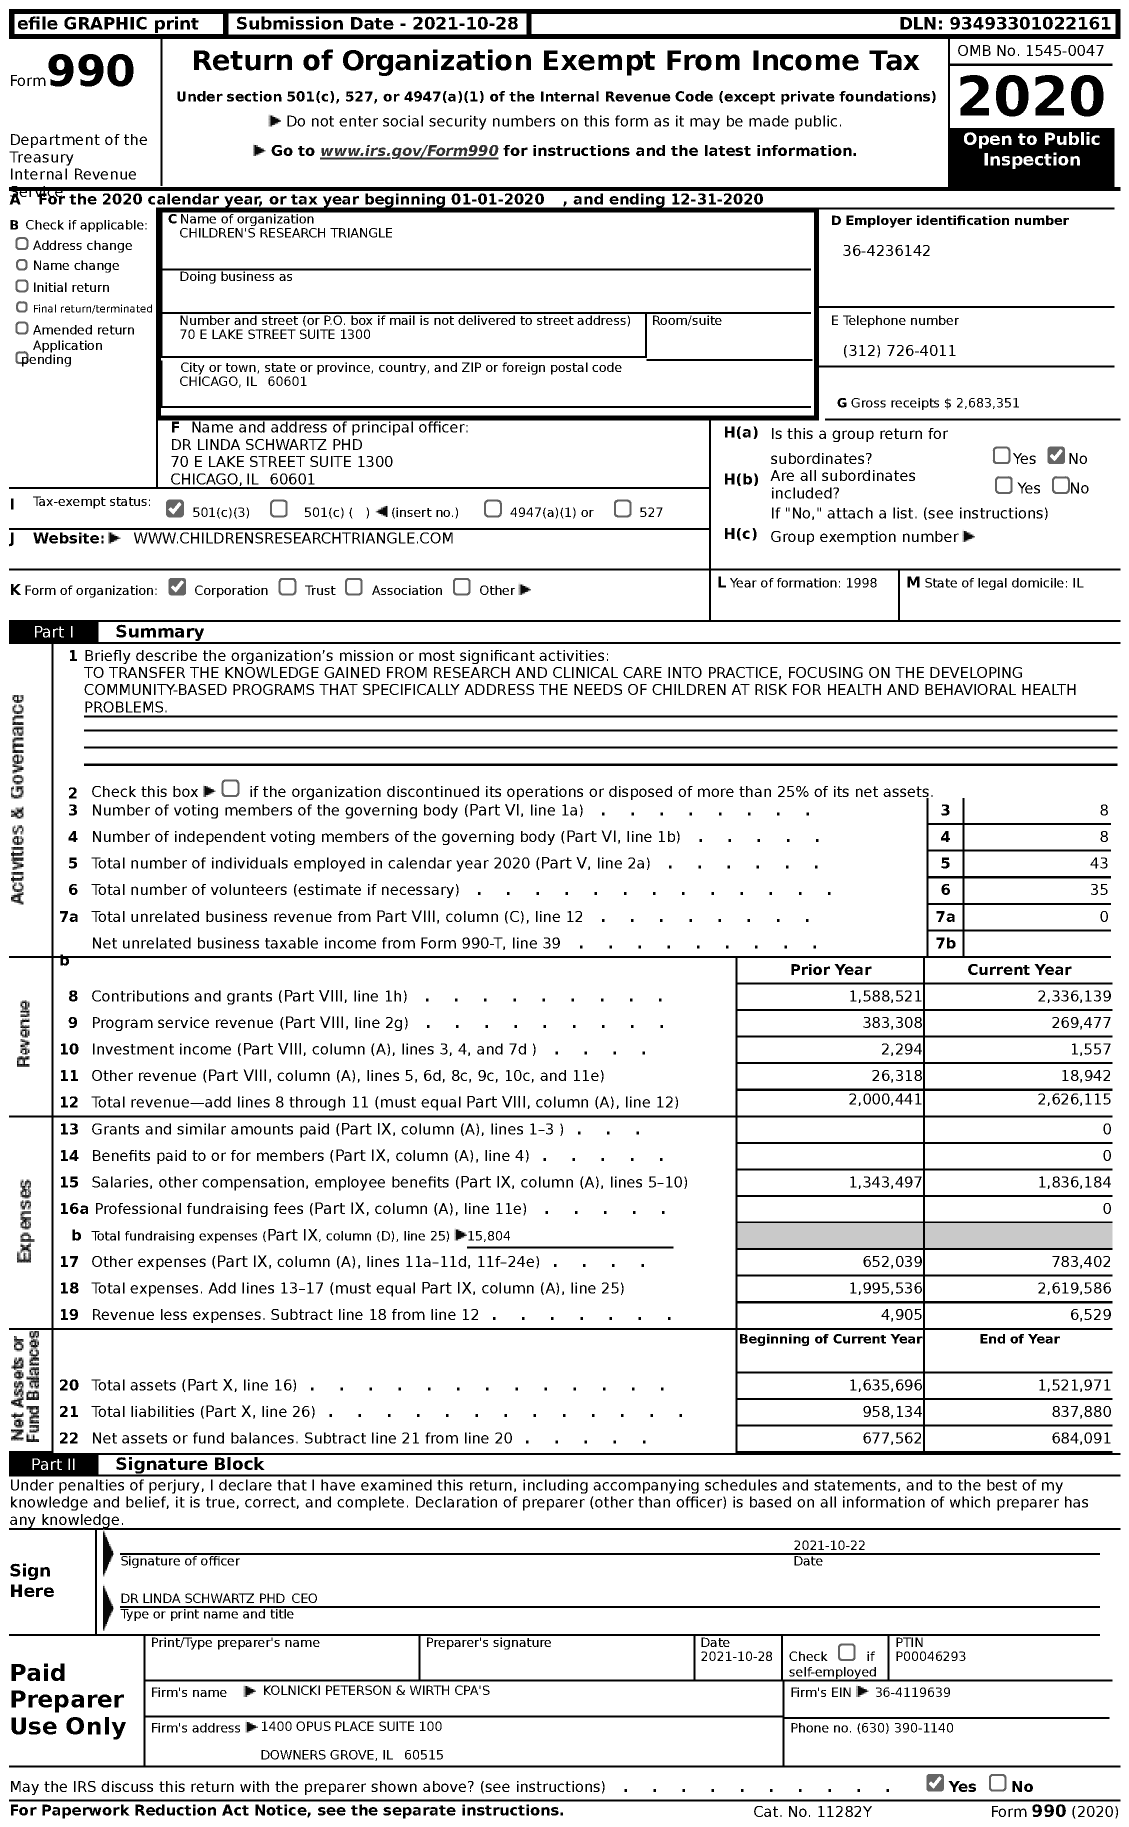 Image of first page of 2020 Form 990 for Children's Research Triangle (CRT)